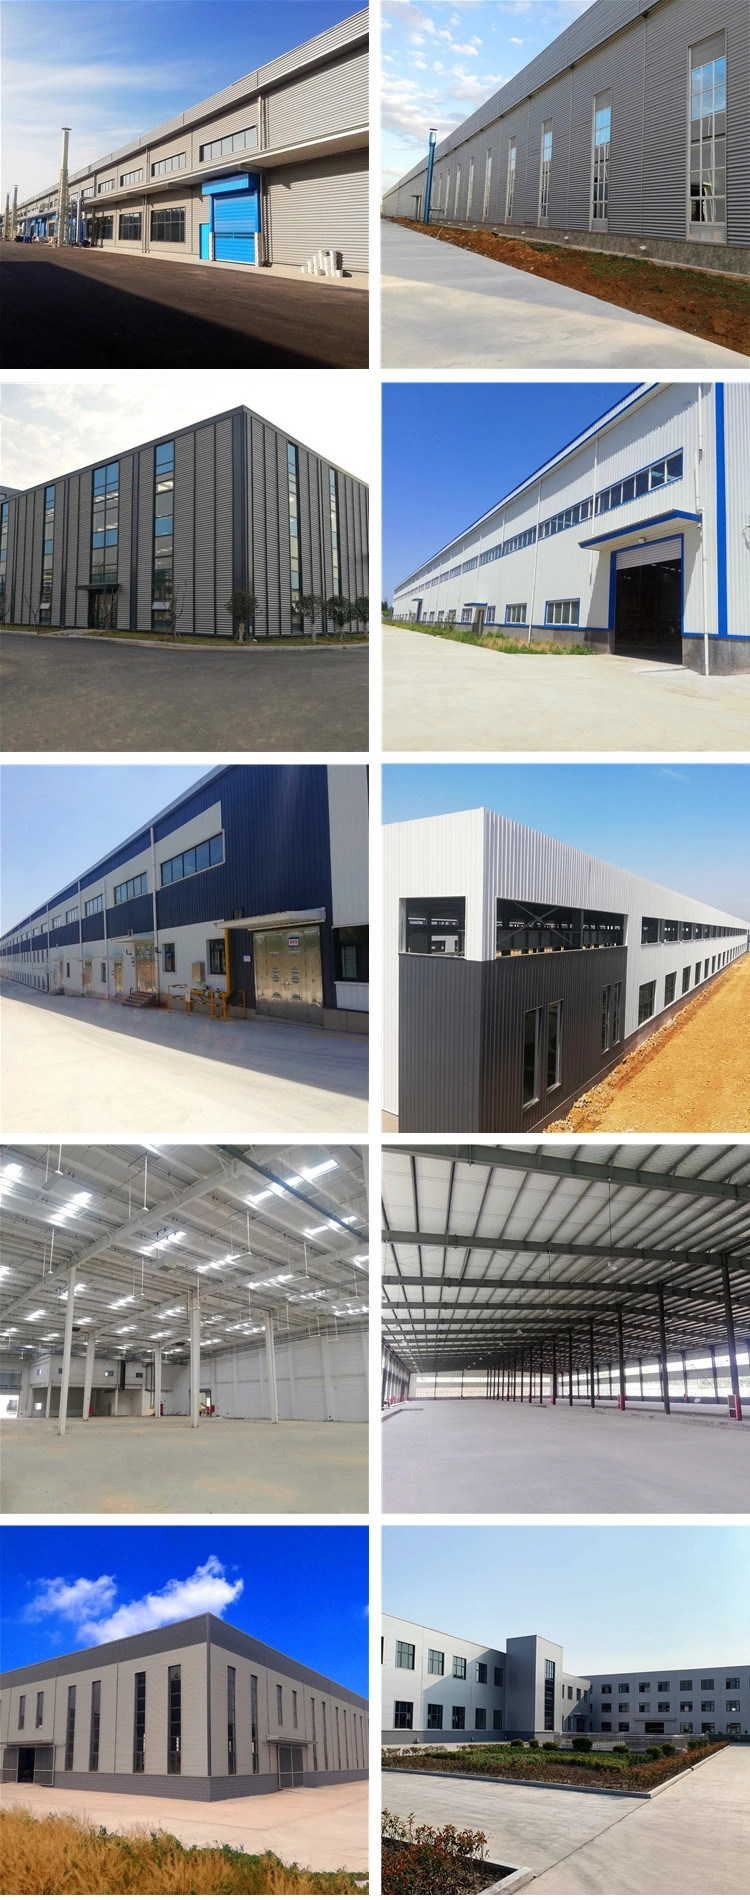 Industrial Building Shed Steel Structure Insulated Prefab Warehouse